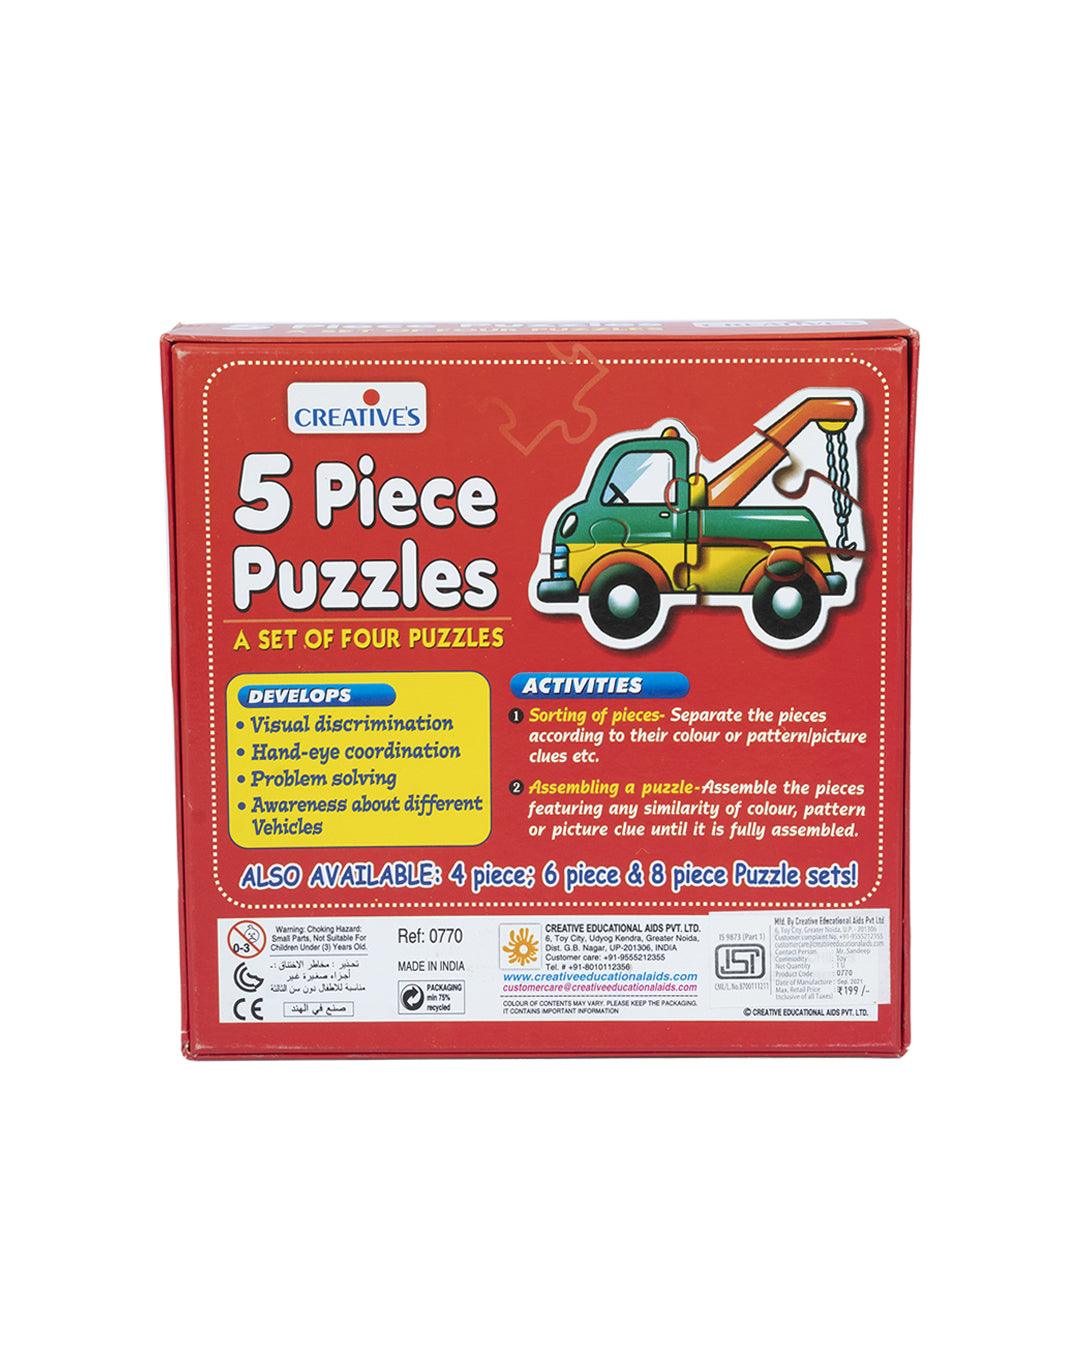 Creative 5 Piece Puzzles (A Set of 4 Puzzles) for Kids - For Child Age 3 & Up - MARKET 99